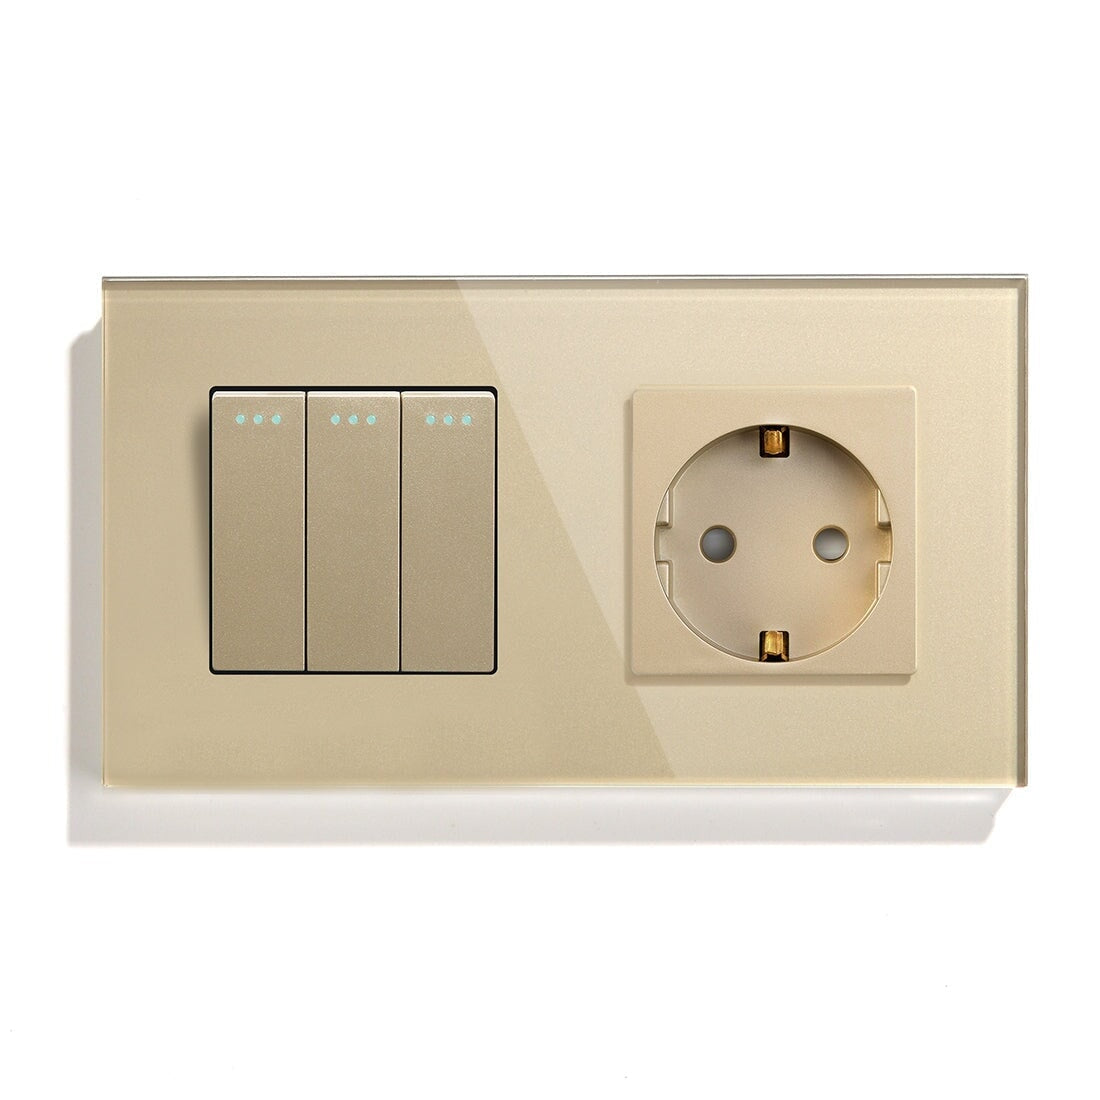 BSEED Mechanical 1/2/3 Gang 1/2Way Touch Light Switch With Normal Eu Socket with typcs-c Power Outlets & Sockets Bseedswitch Golden 3Gang 1Way